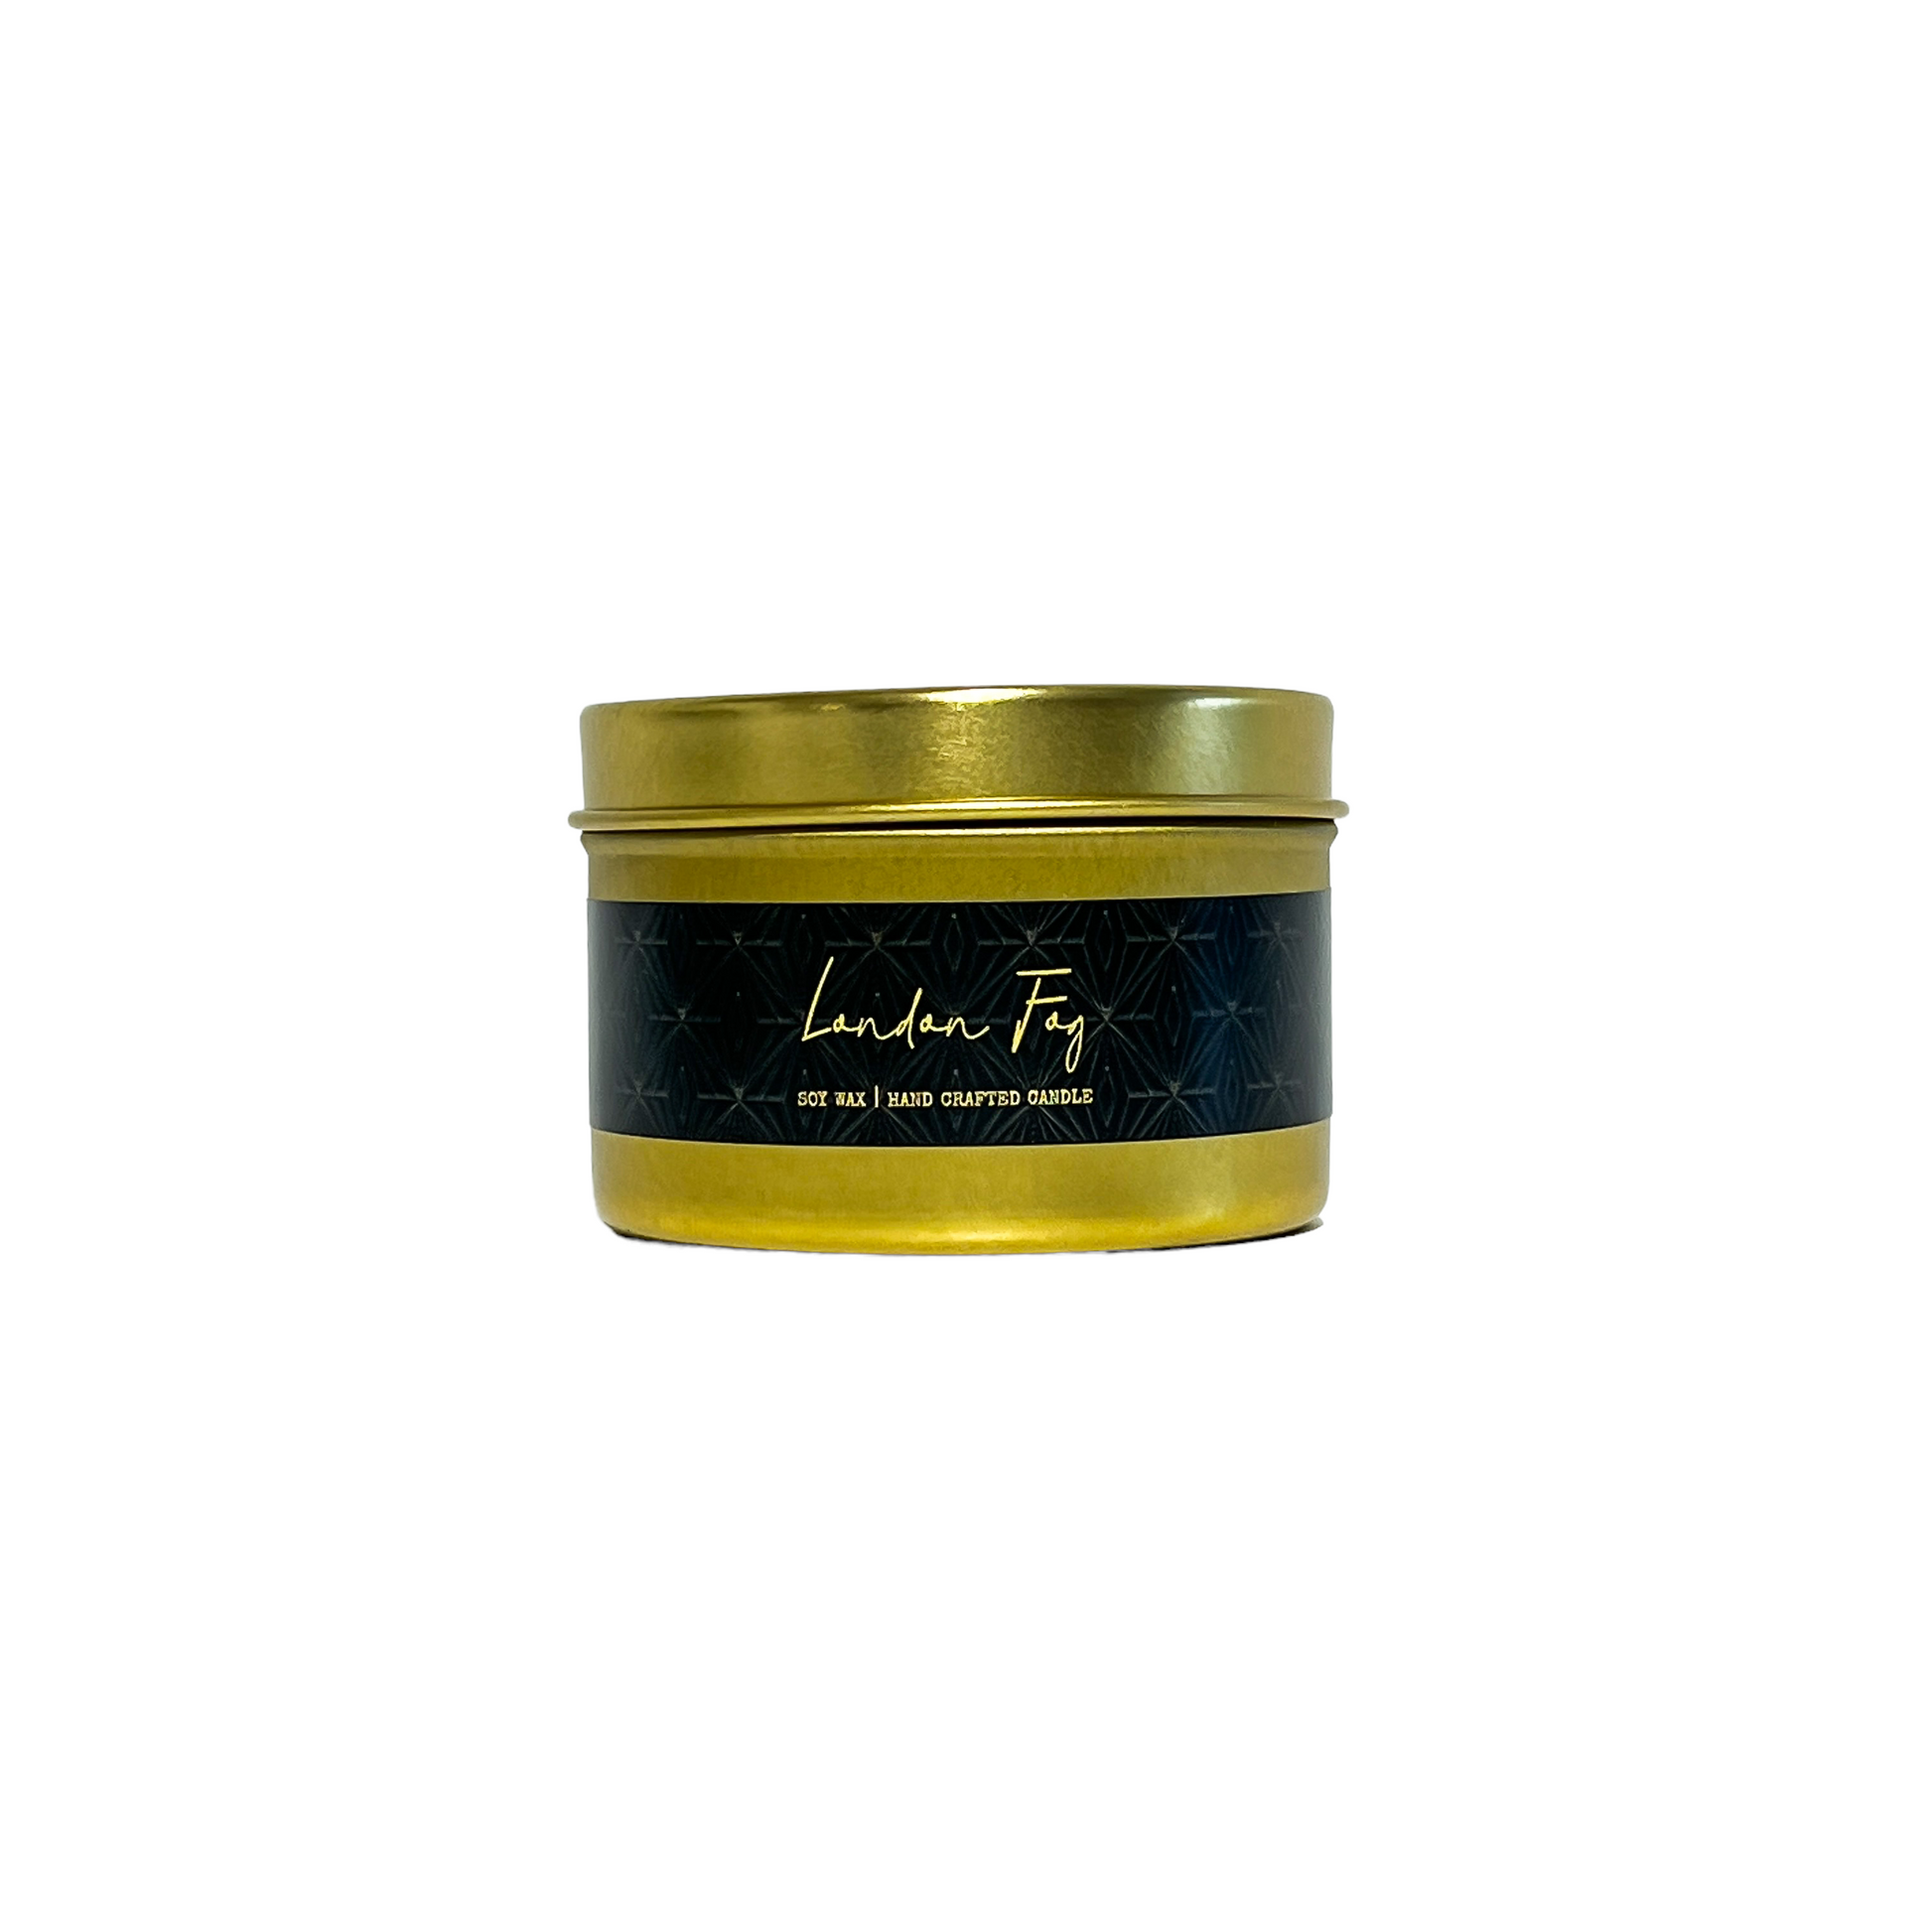 Gold, four ounce, bergamot and vanilla scented soy wax candle with a gold lid and a black label that reads London Fog